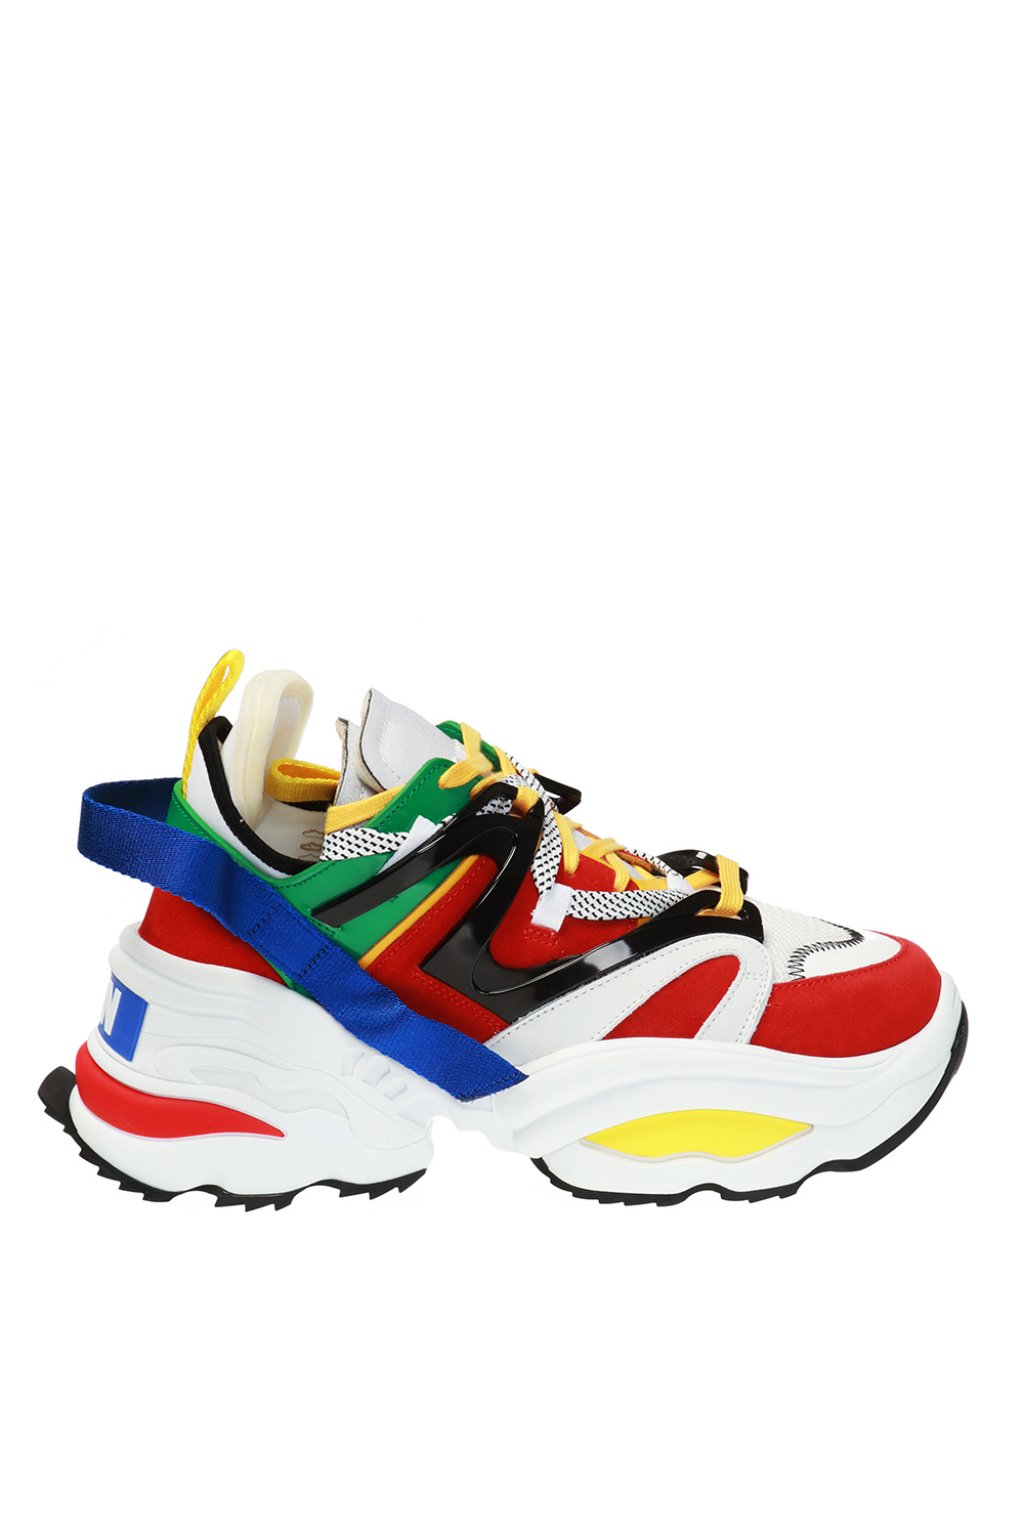 dsquared giant sneaker